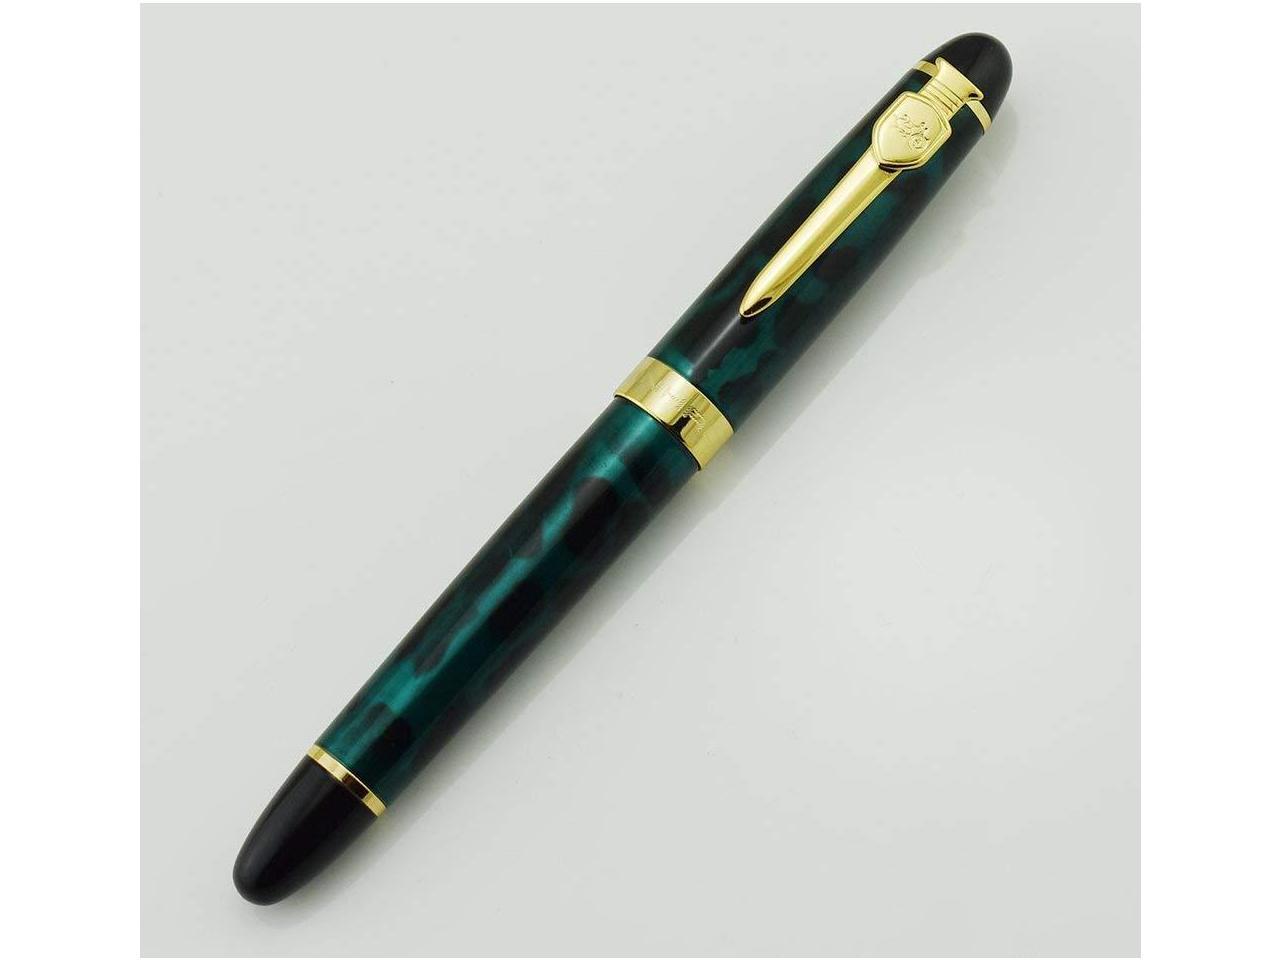 free shipping new JINHAO X450 drown GREEN MARBLED ROLLER BALL PEN 